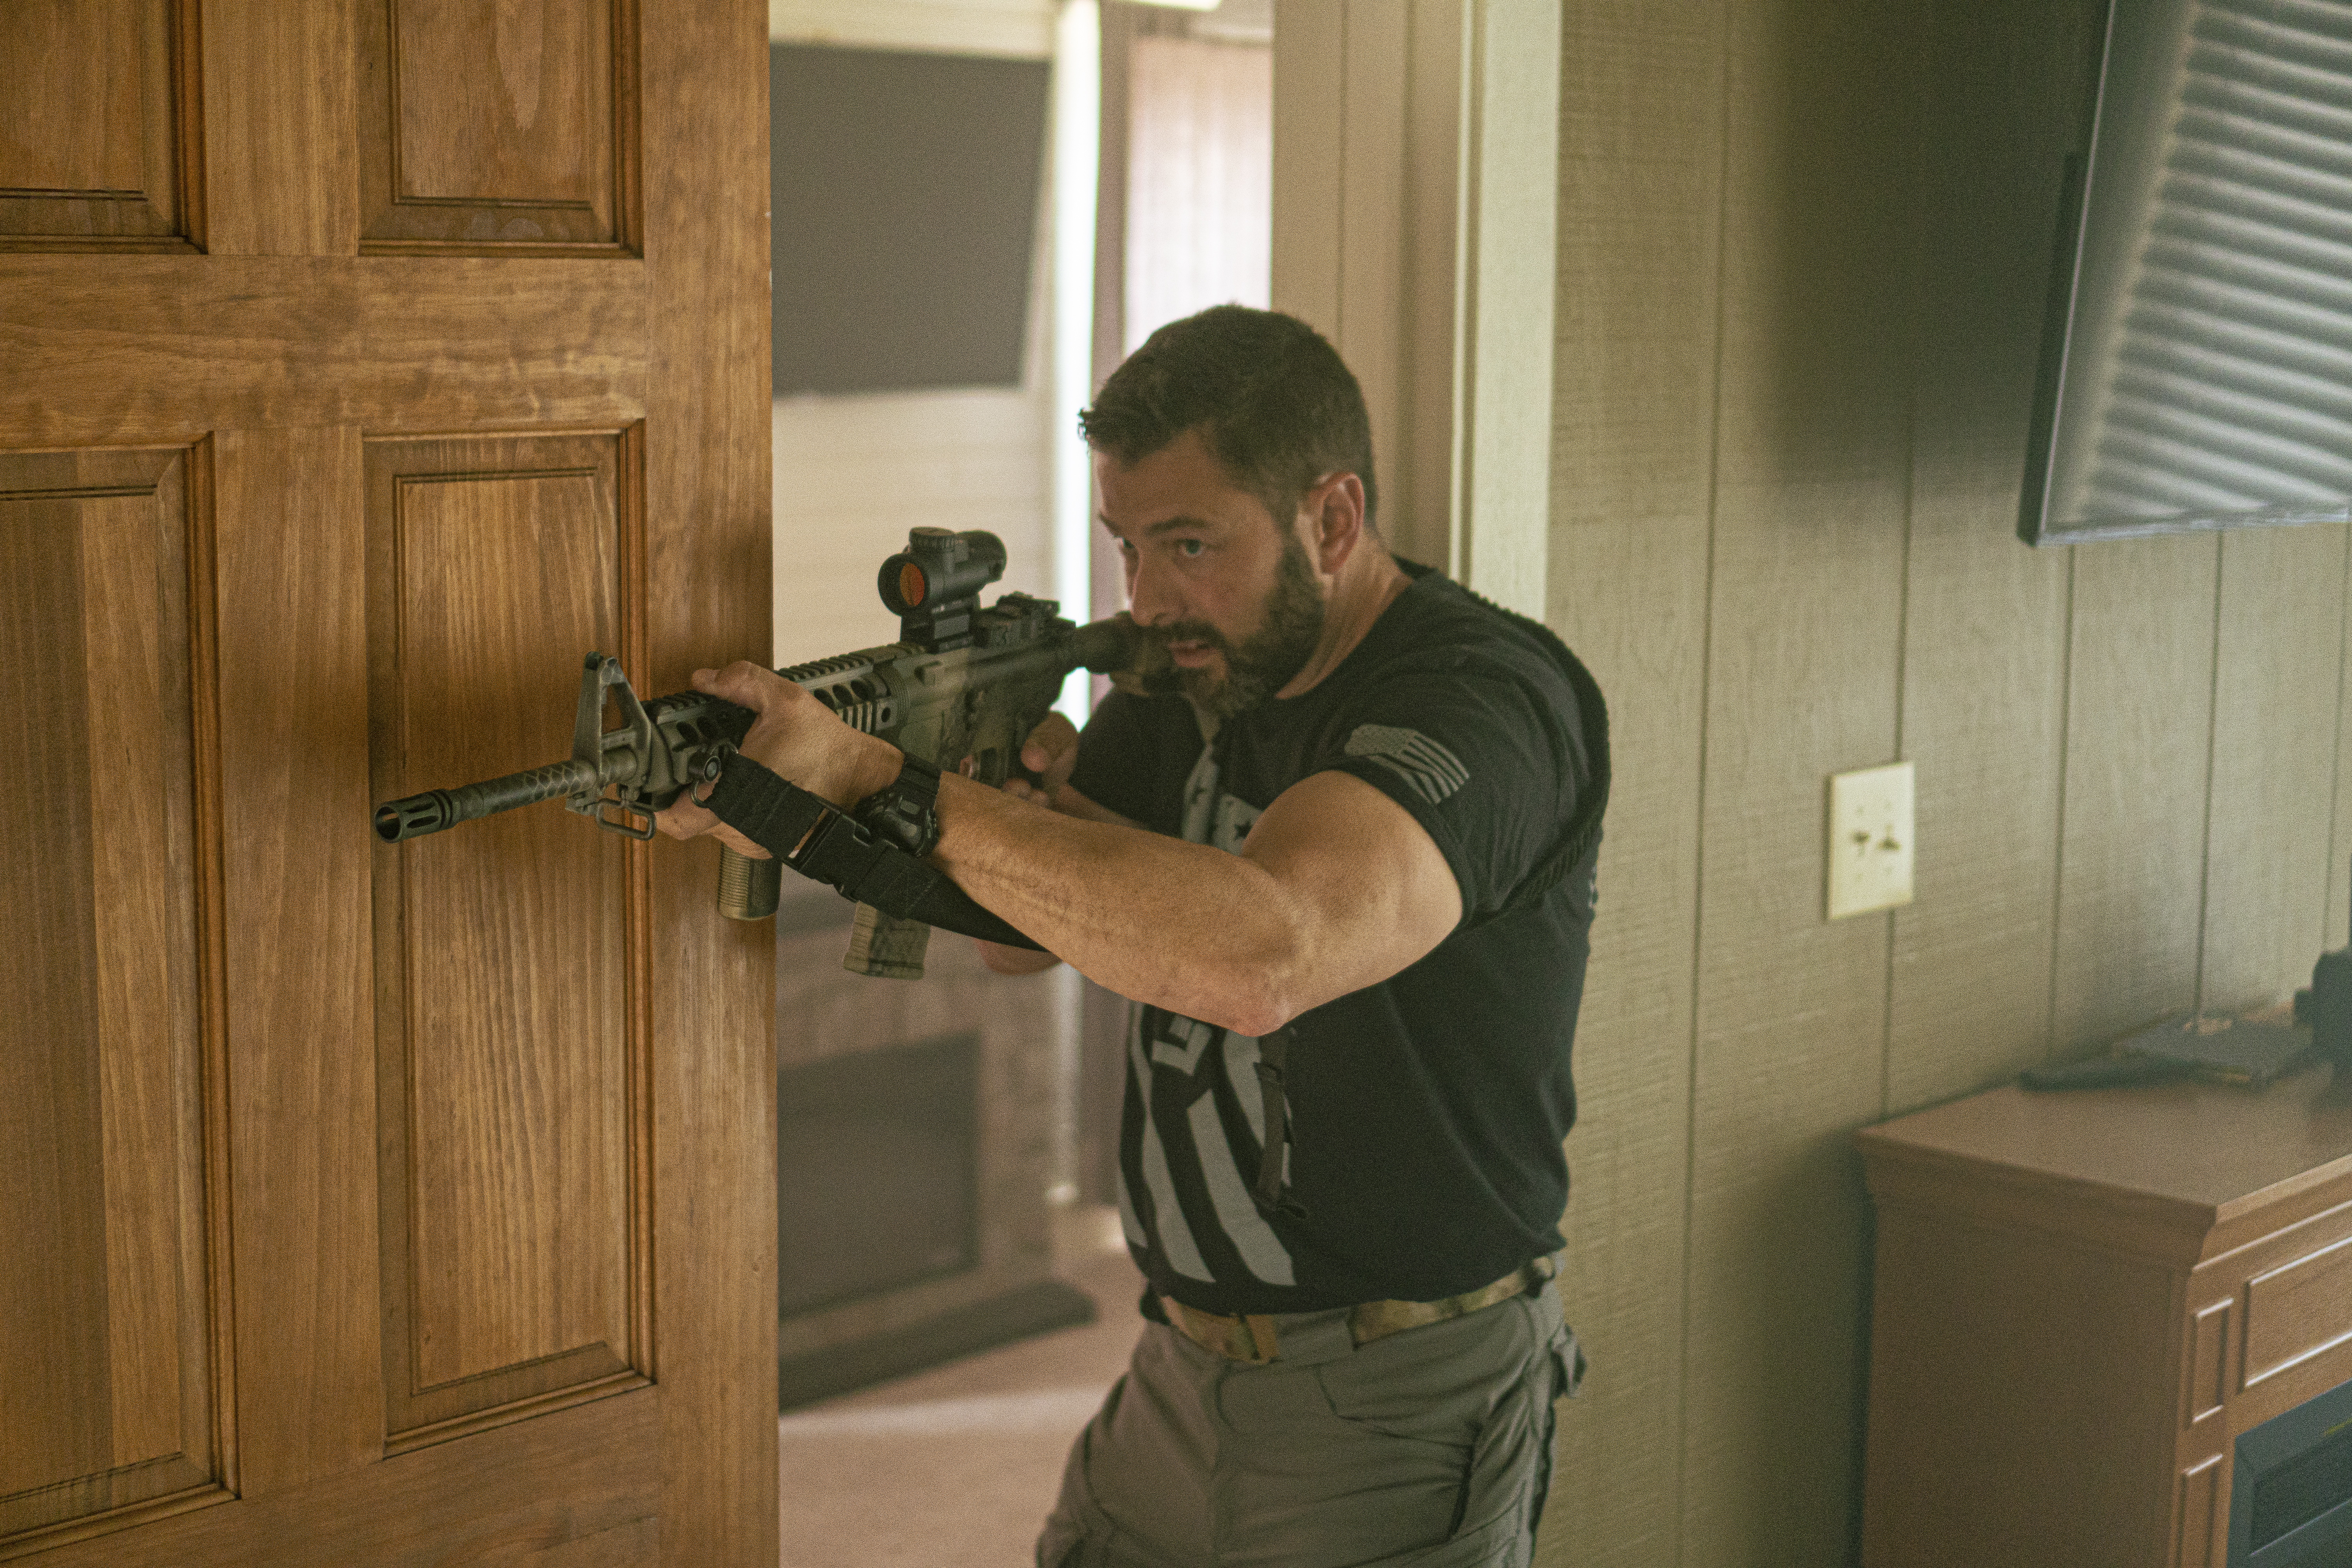 Man clearing doorway with AR15 in a house